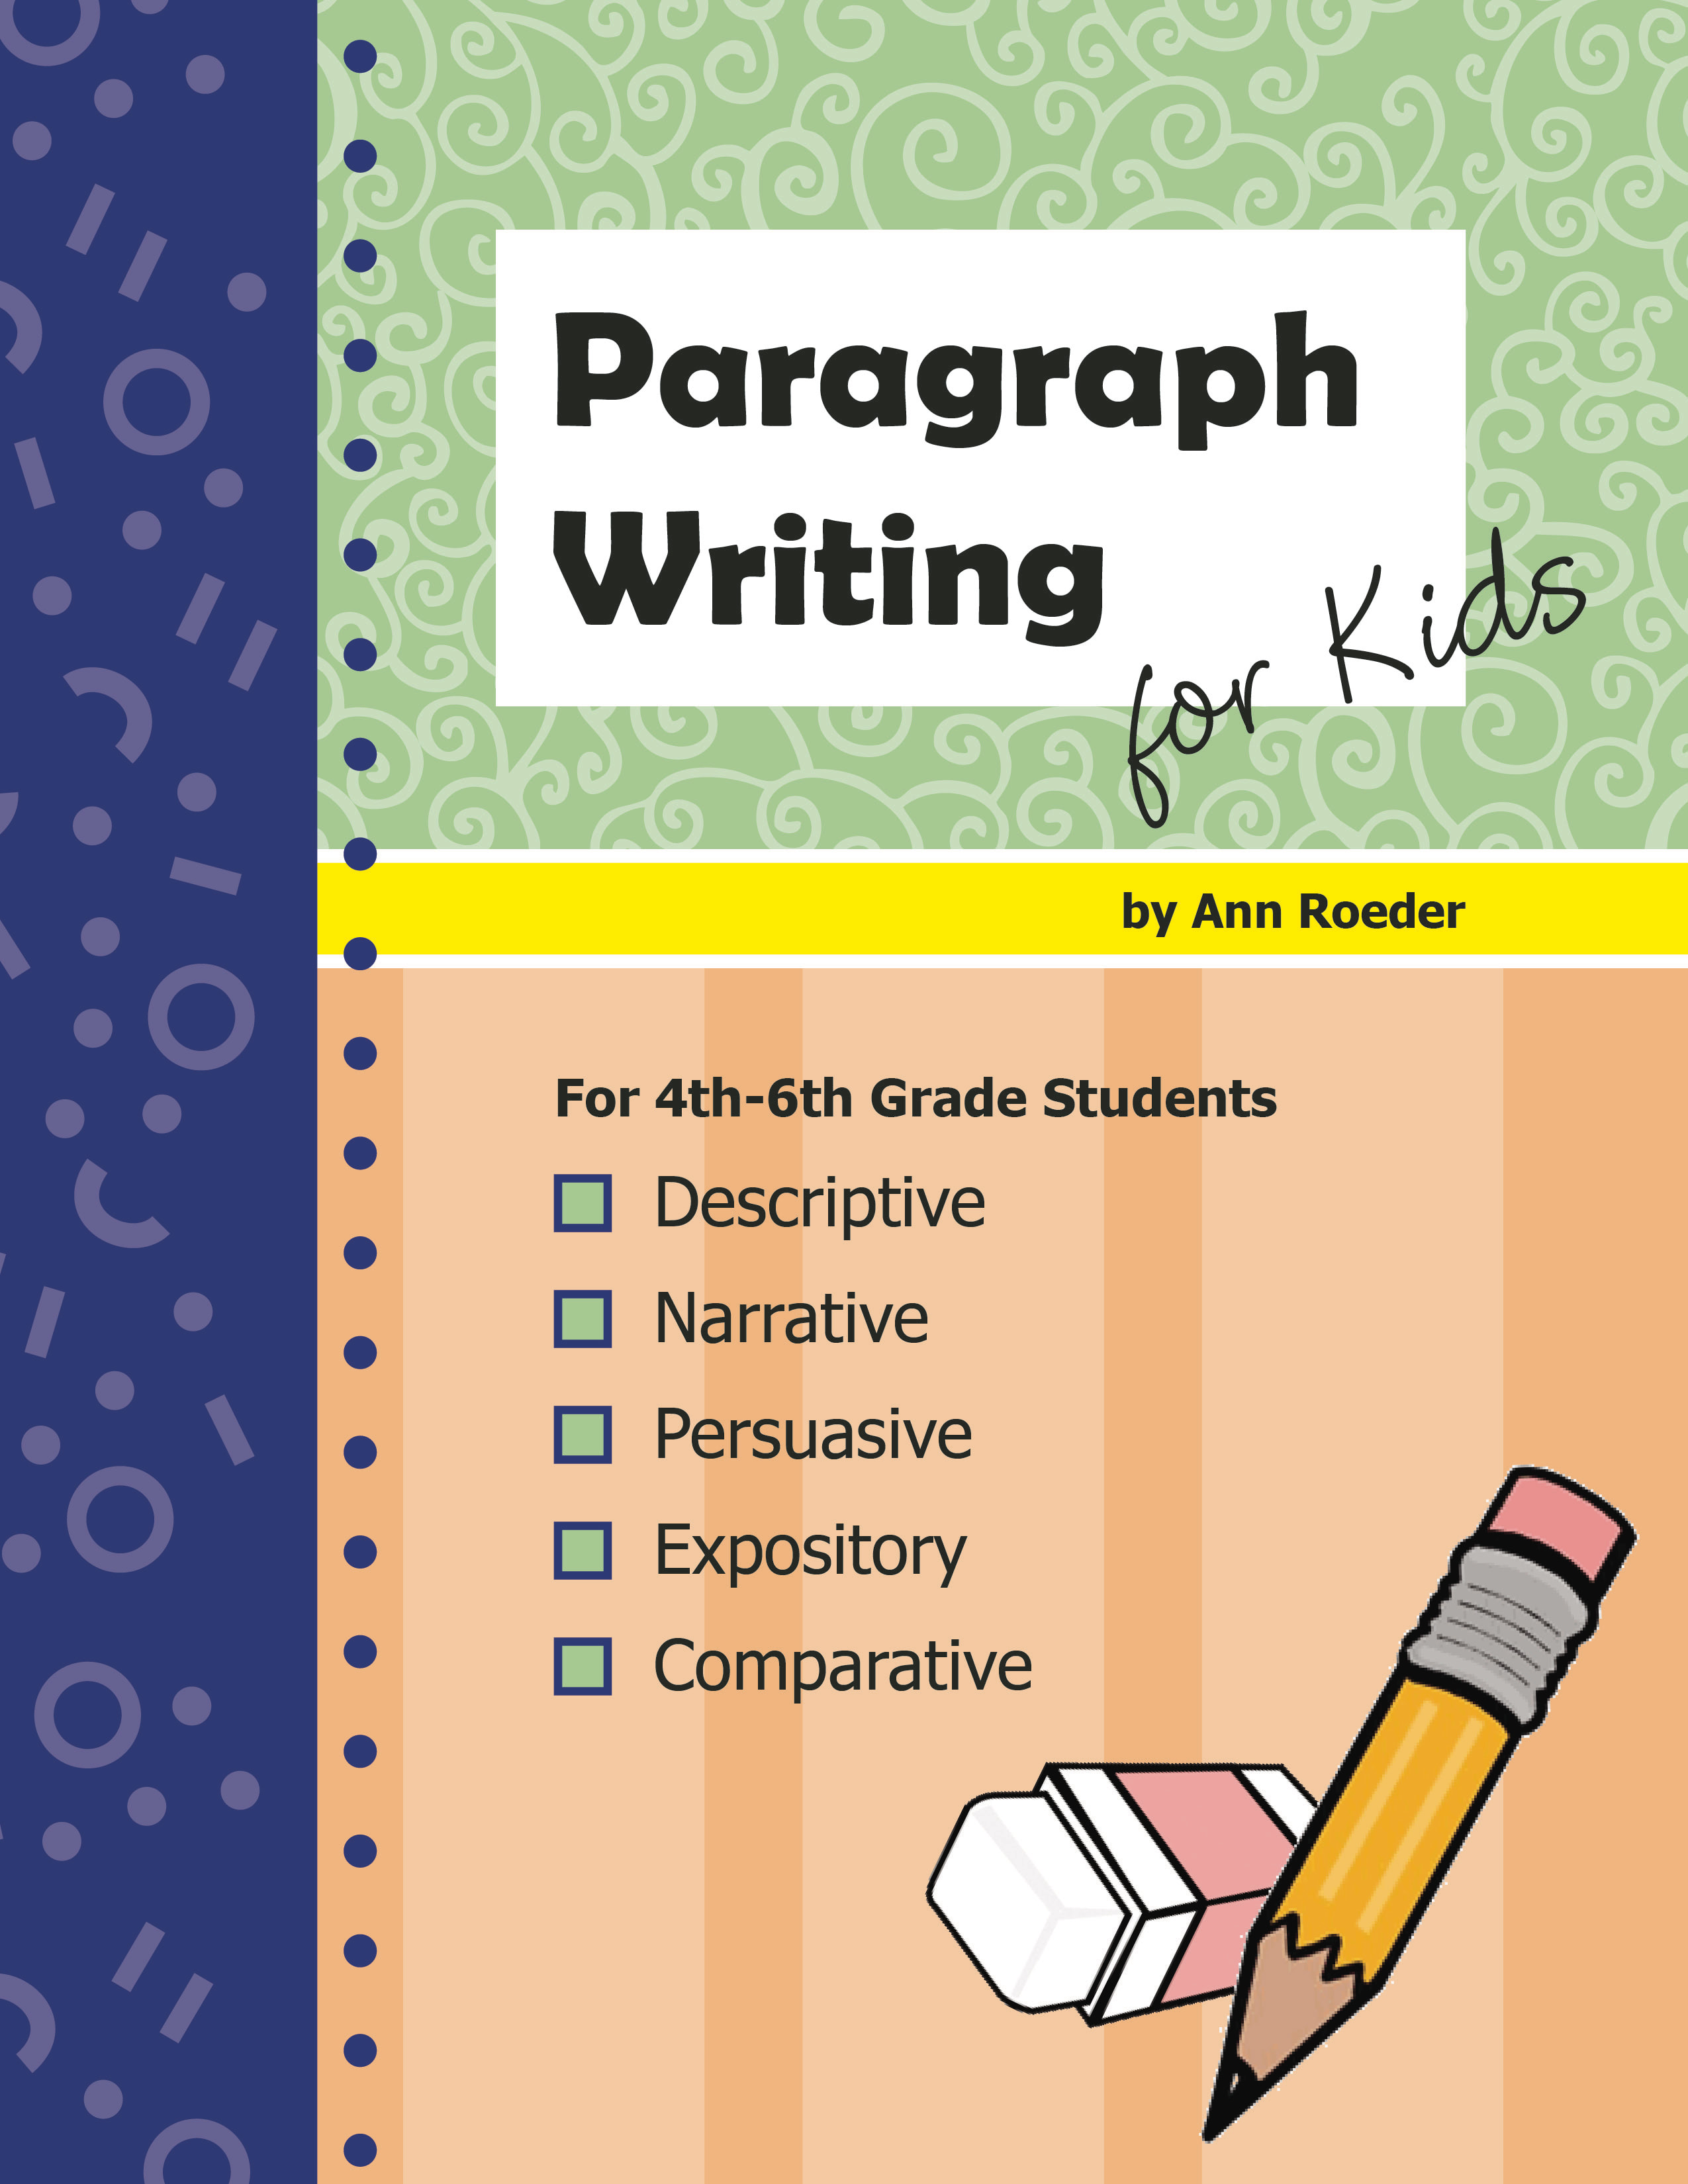 Paragraph Writing for Kids - 29th through 29th grade